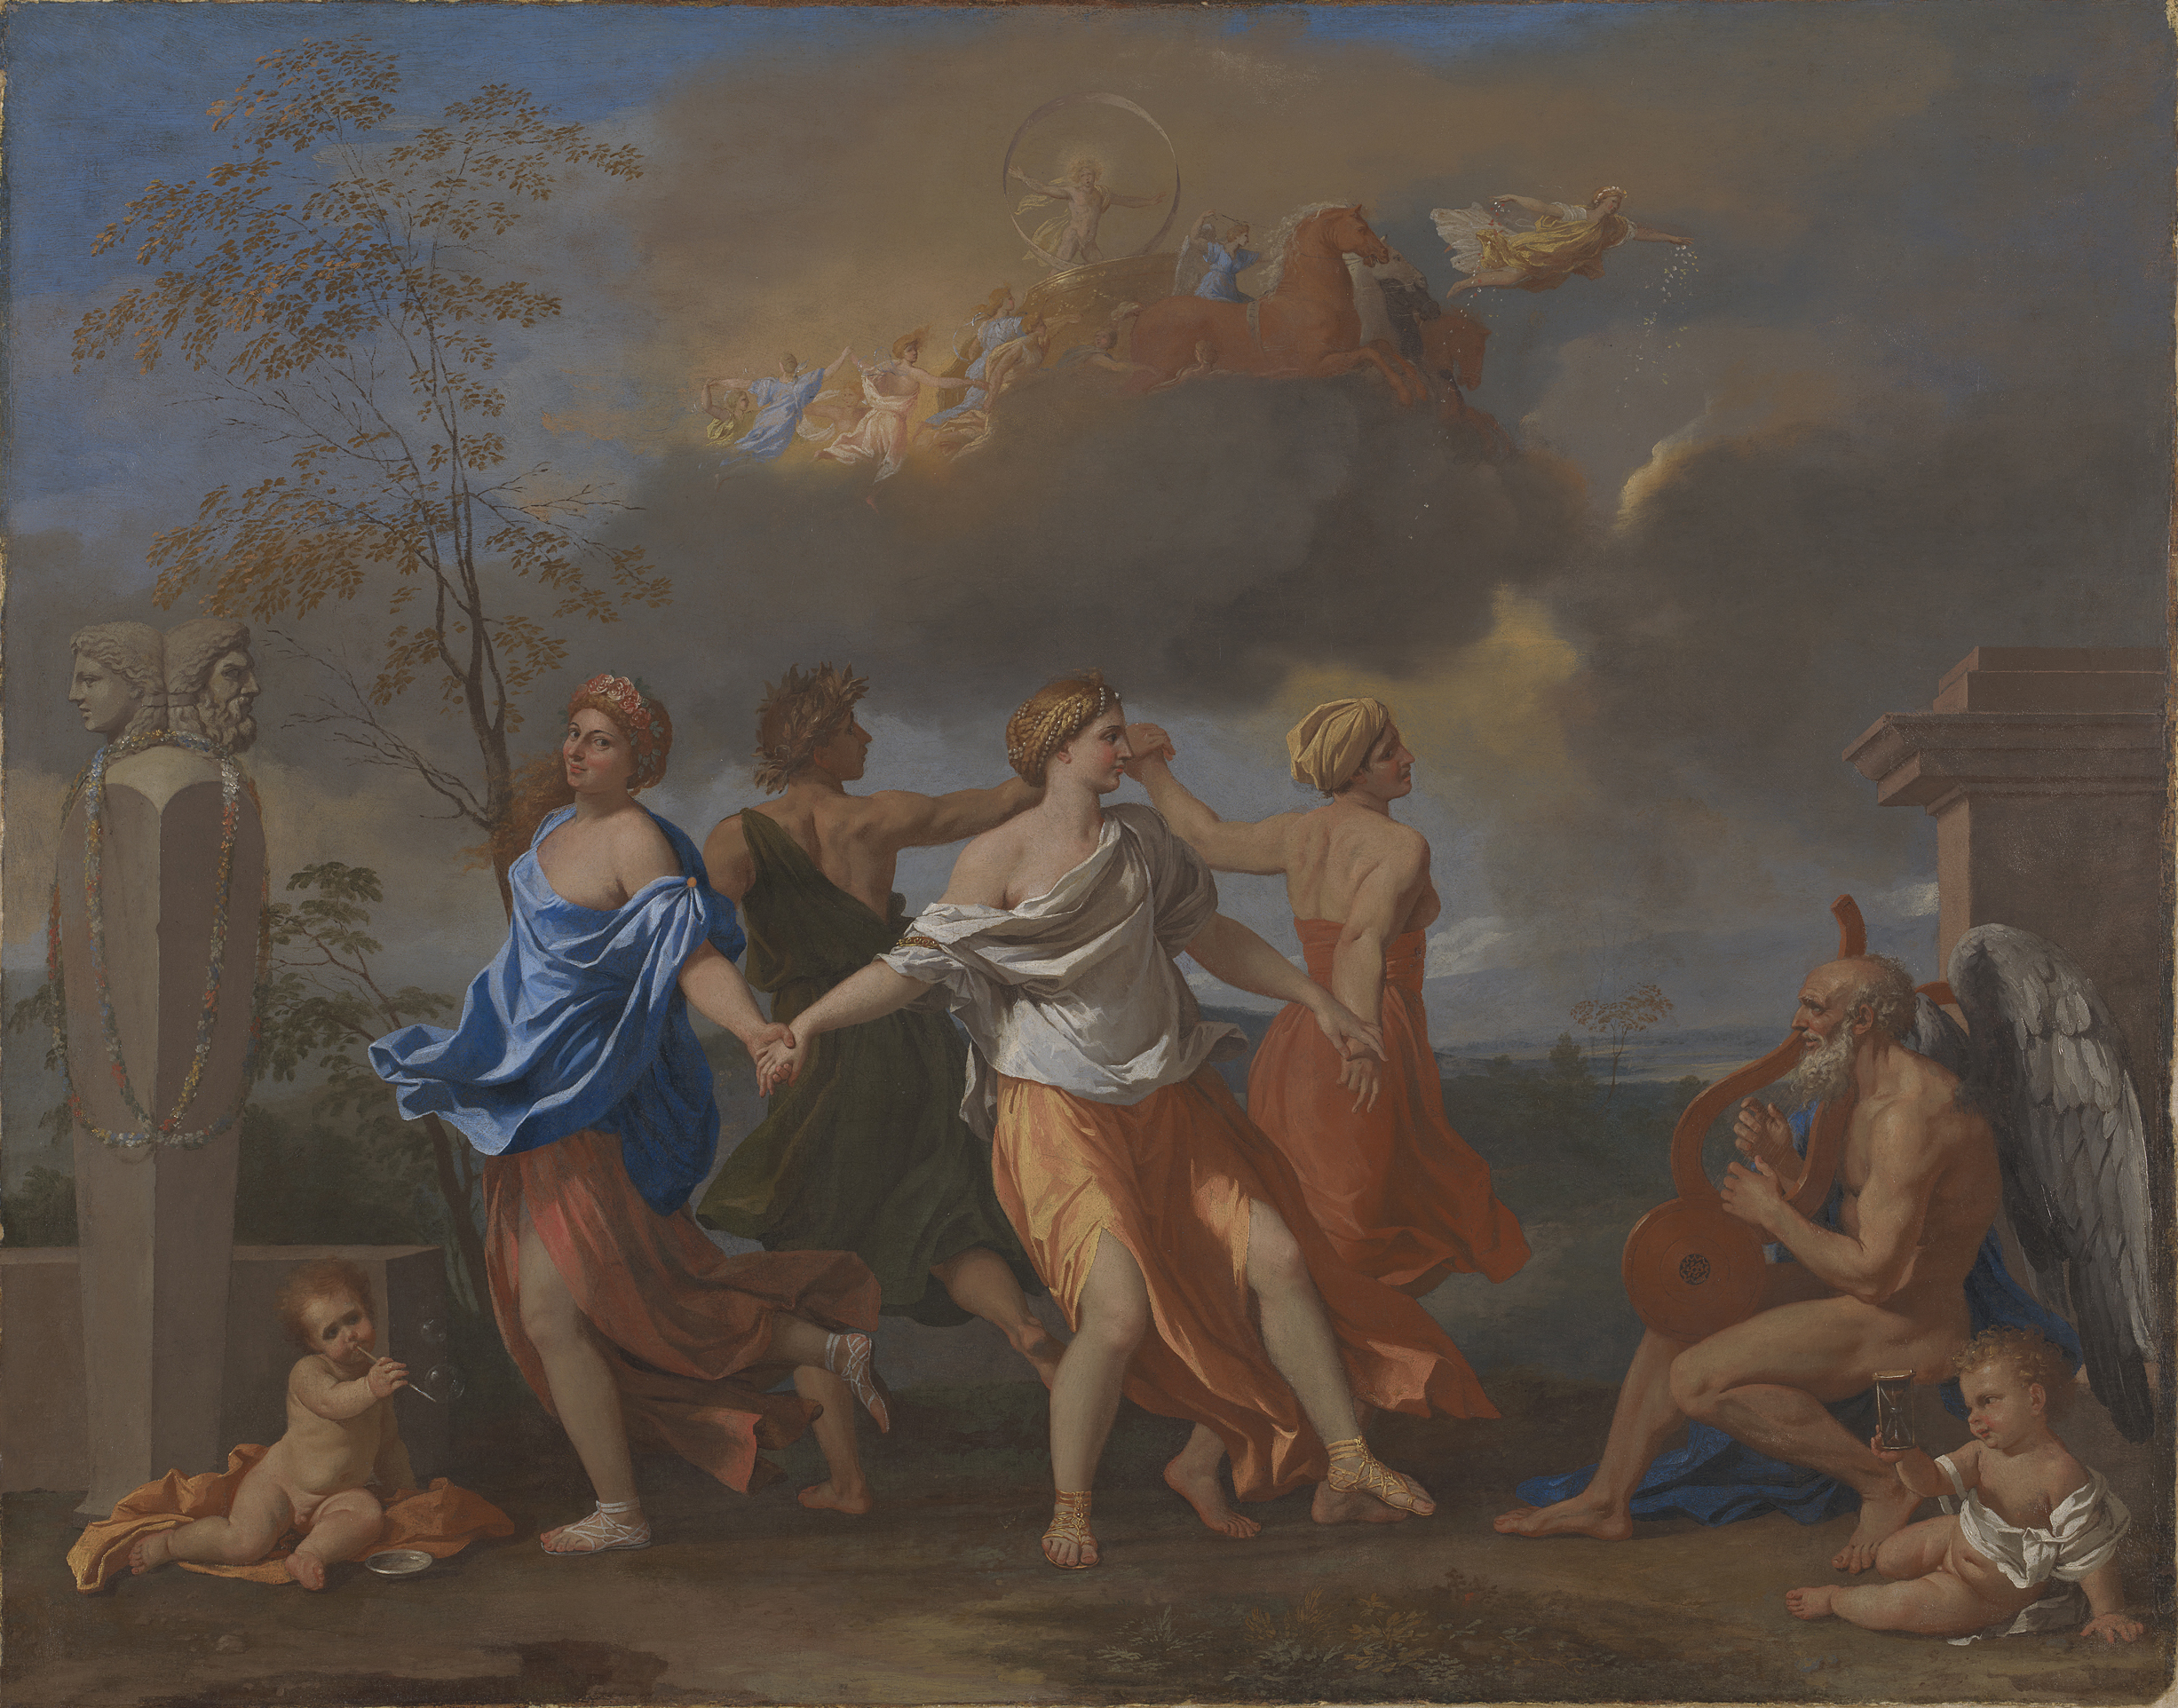 Nicolas Poussin, A Dance to the Music of Time, about 1634-6, Oil on canvas, 82.5 x 104 cm, by kind permission of the Trustees of the Wallace Collection, London (P108), © The Trustees of the Wallace Collection